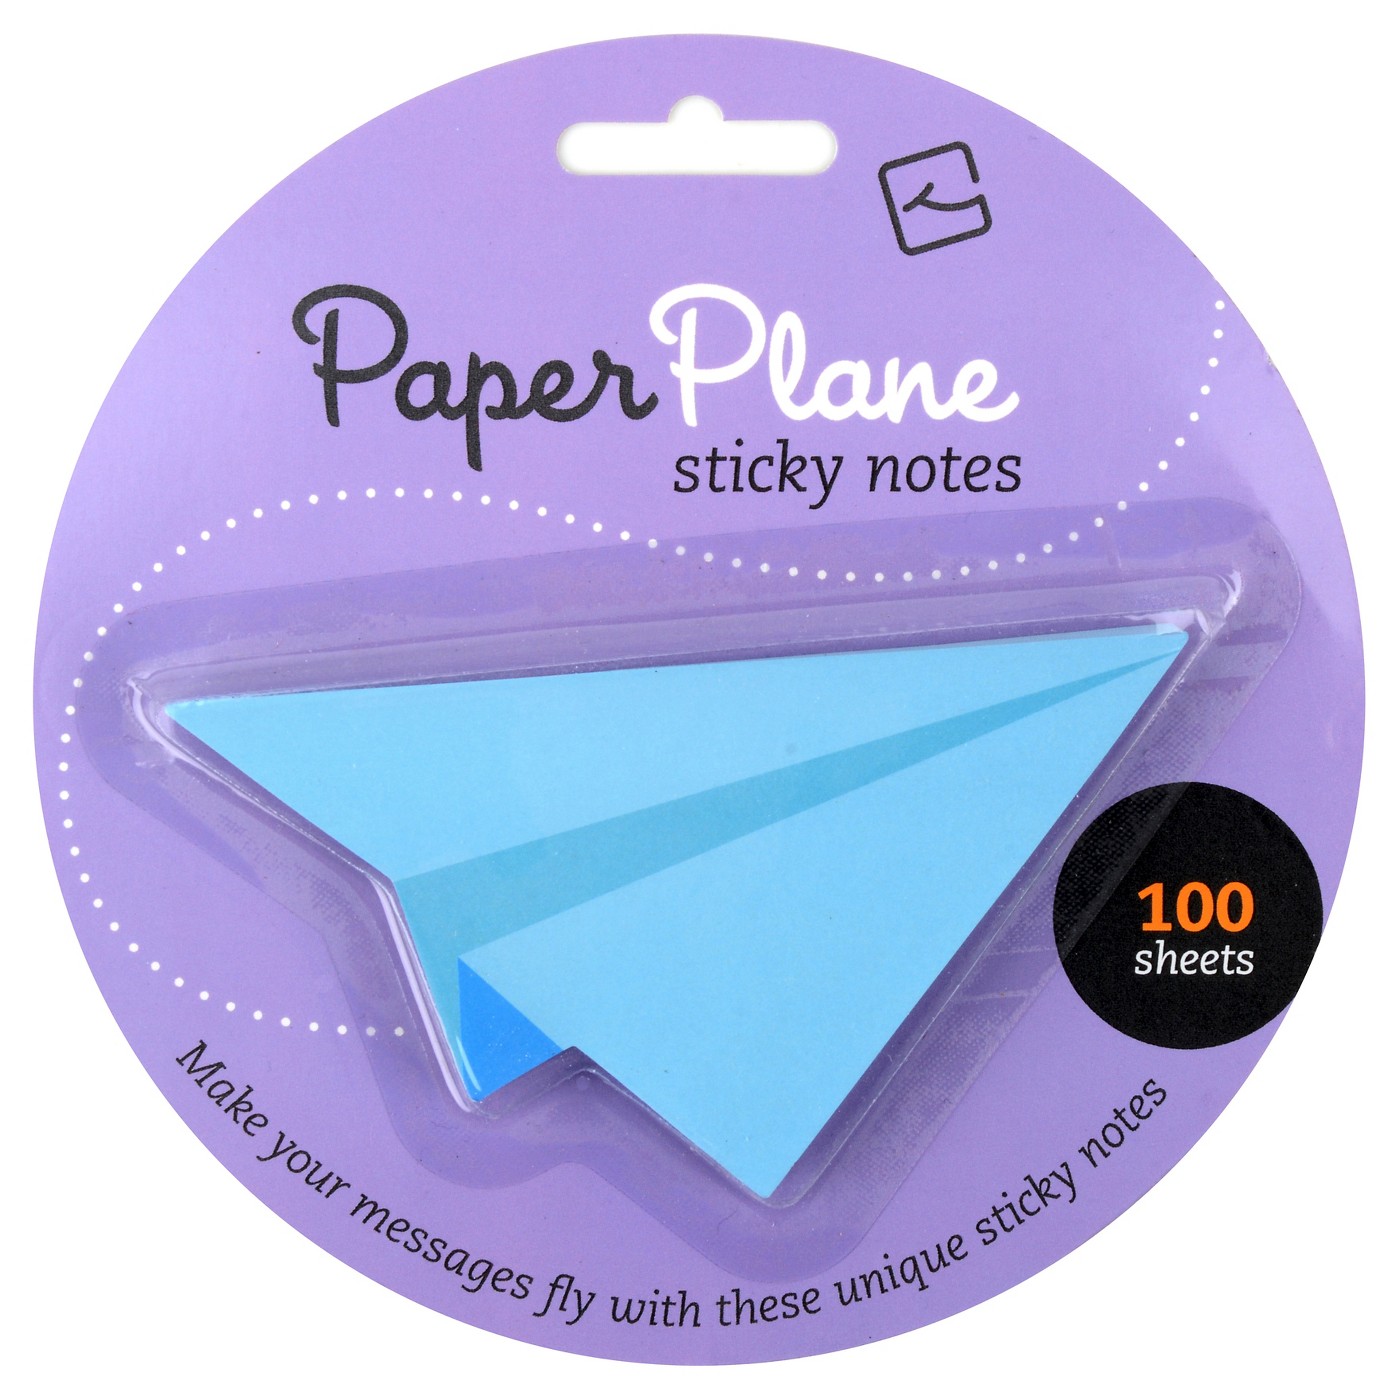 Sticky notes - Paperplane | Thinking Gifts